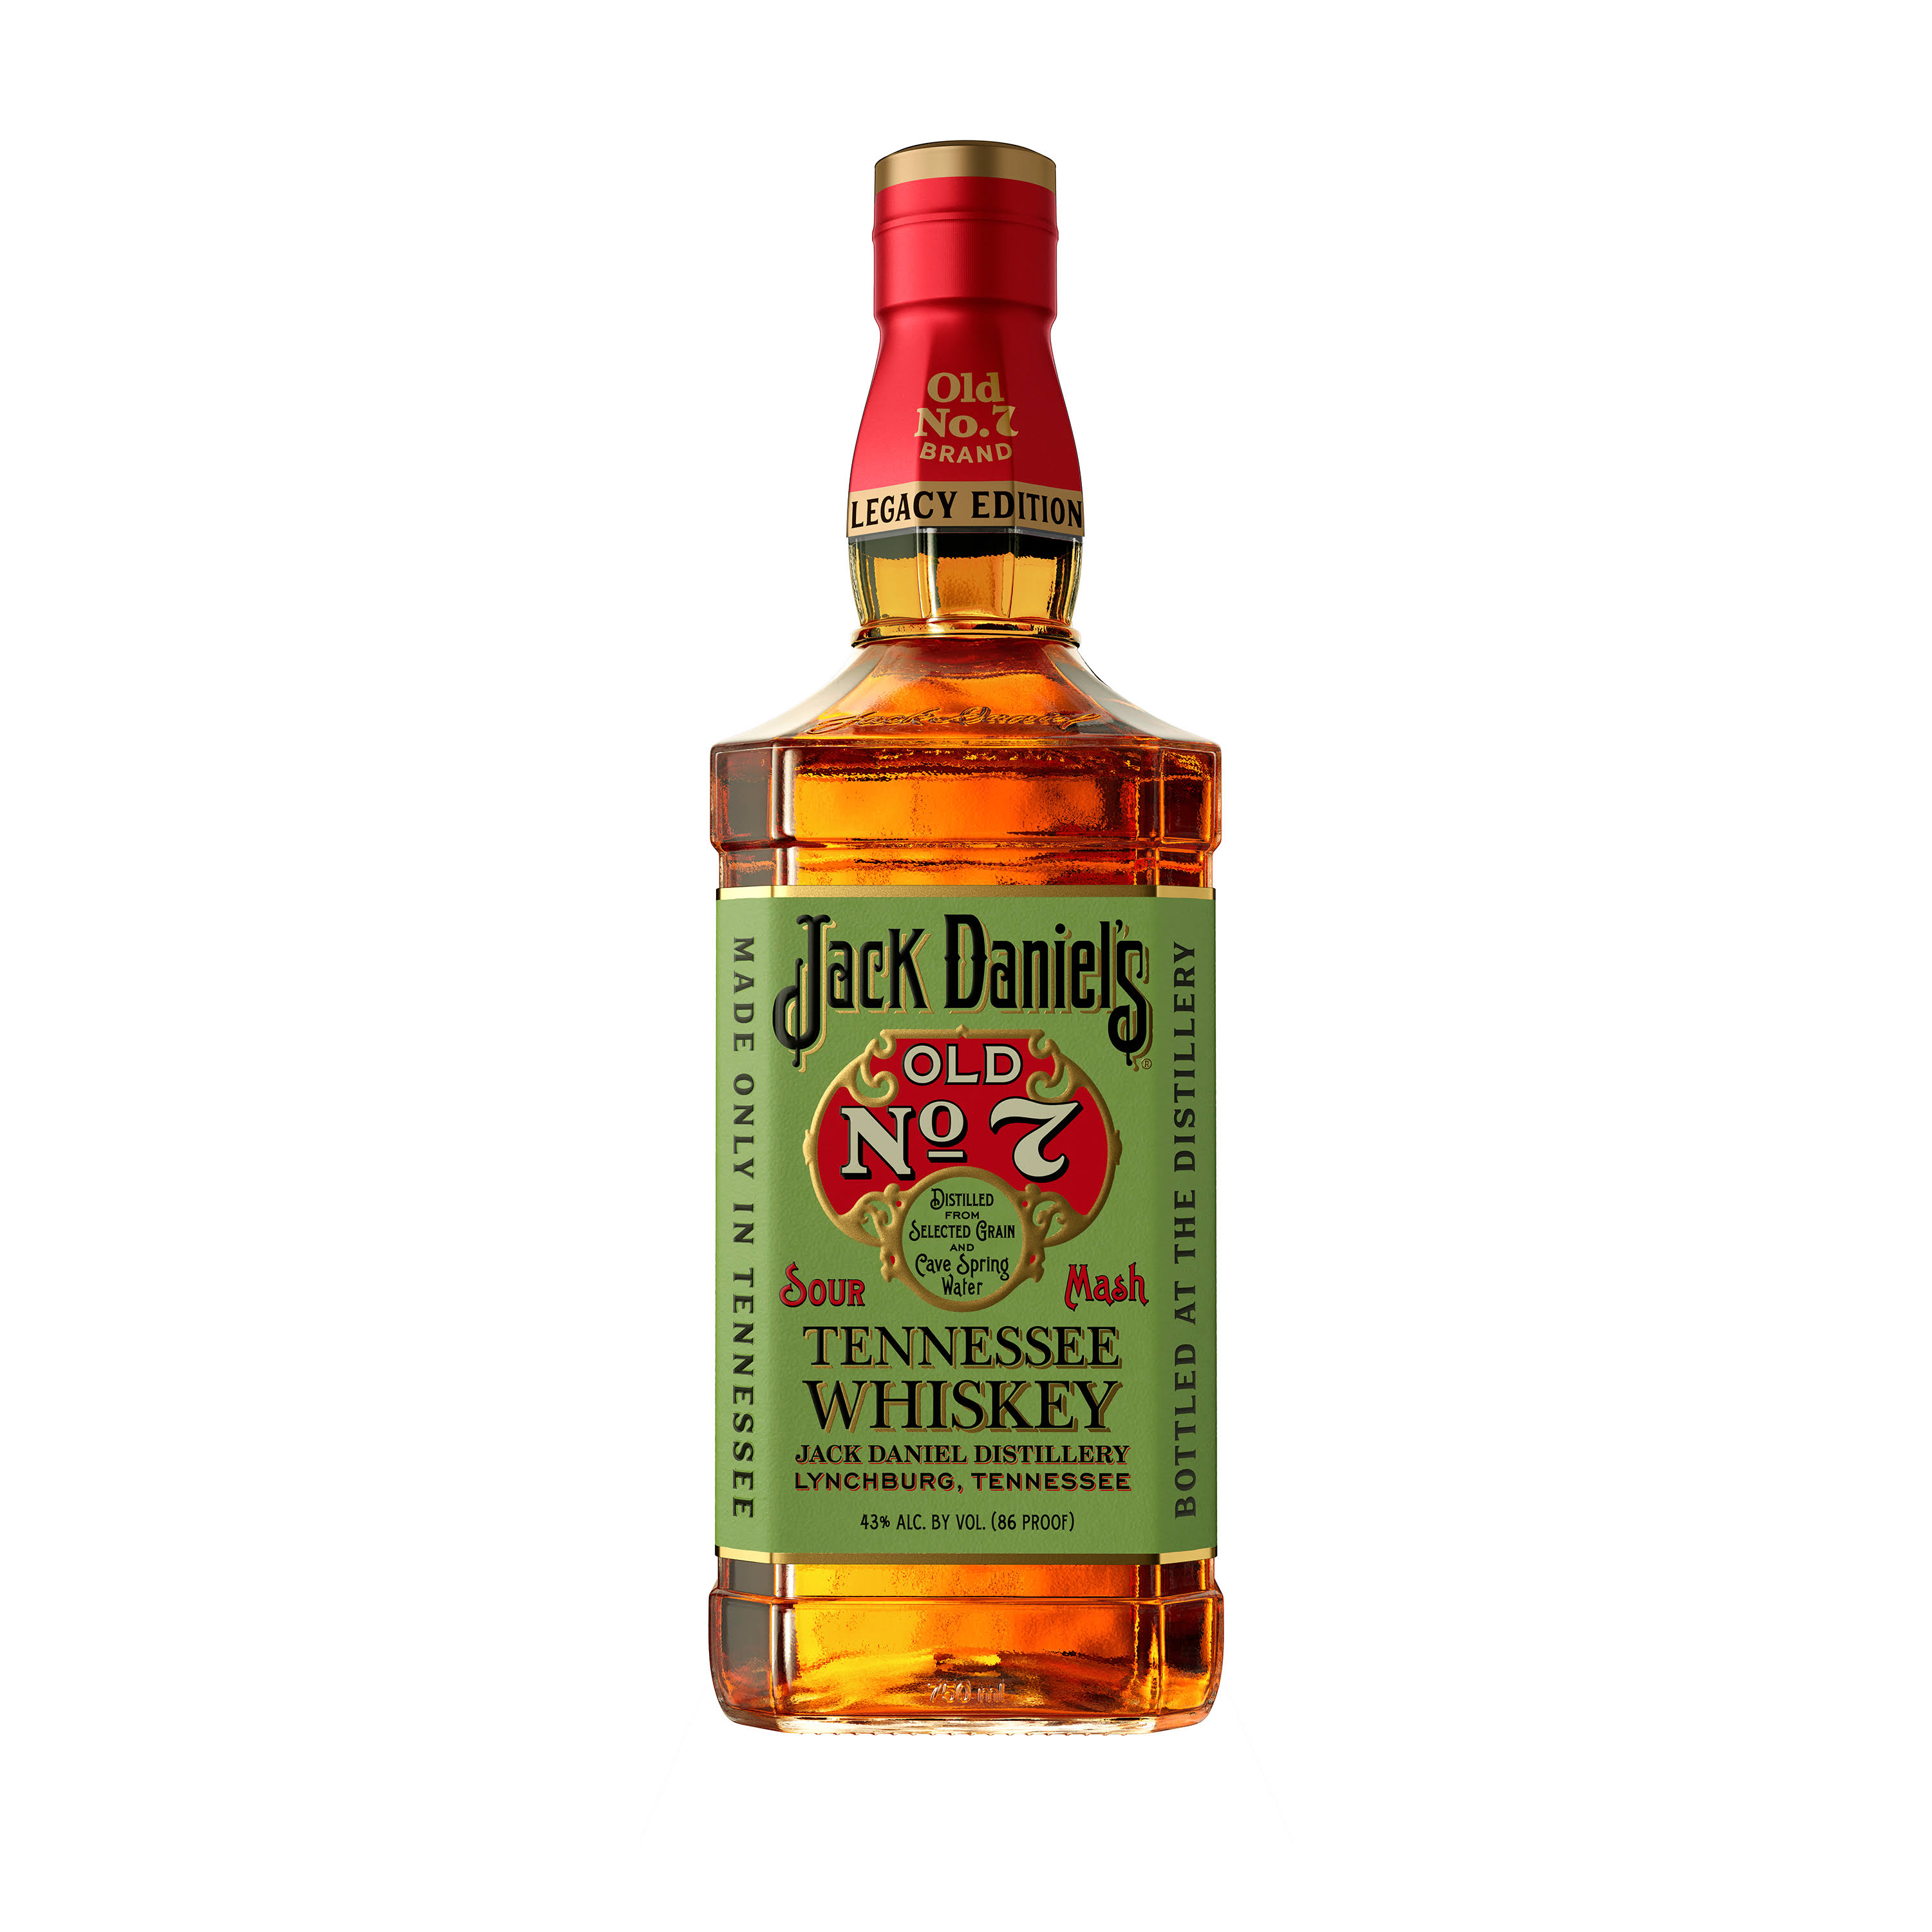 Jack Daniels Old No. 7 Whiskey, Tennessee Whiskey - 750 ml